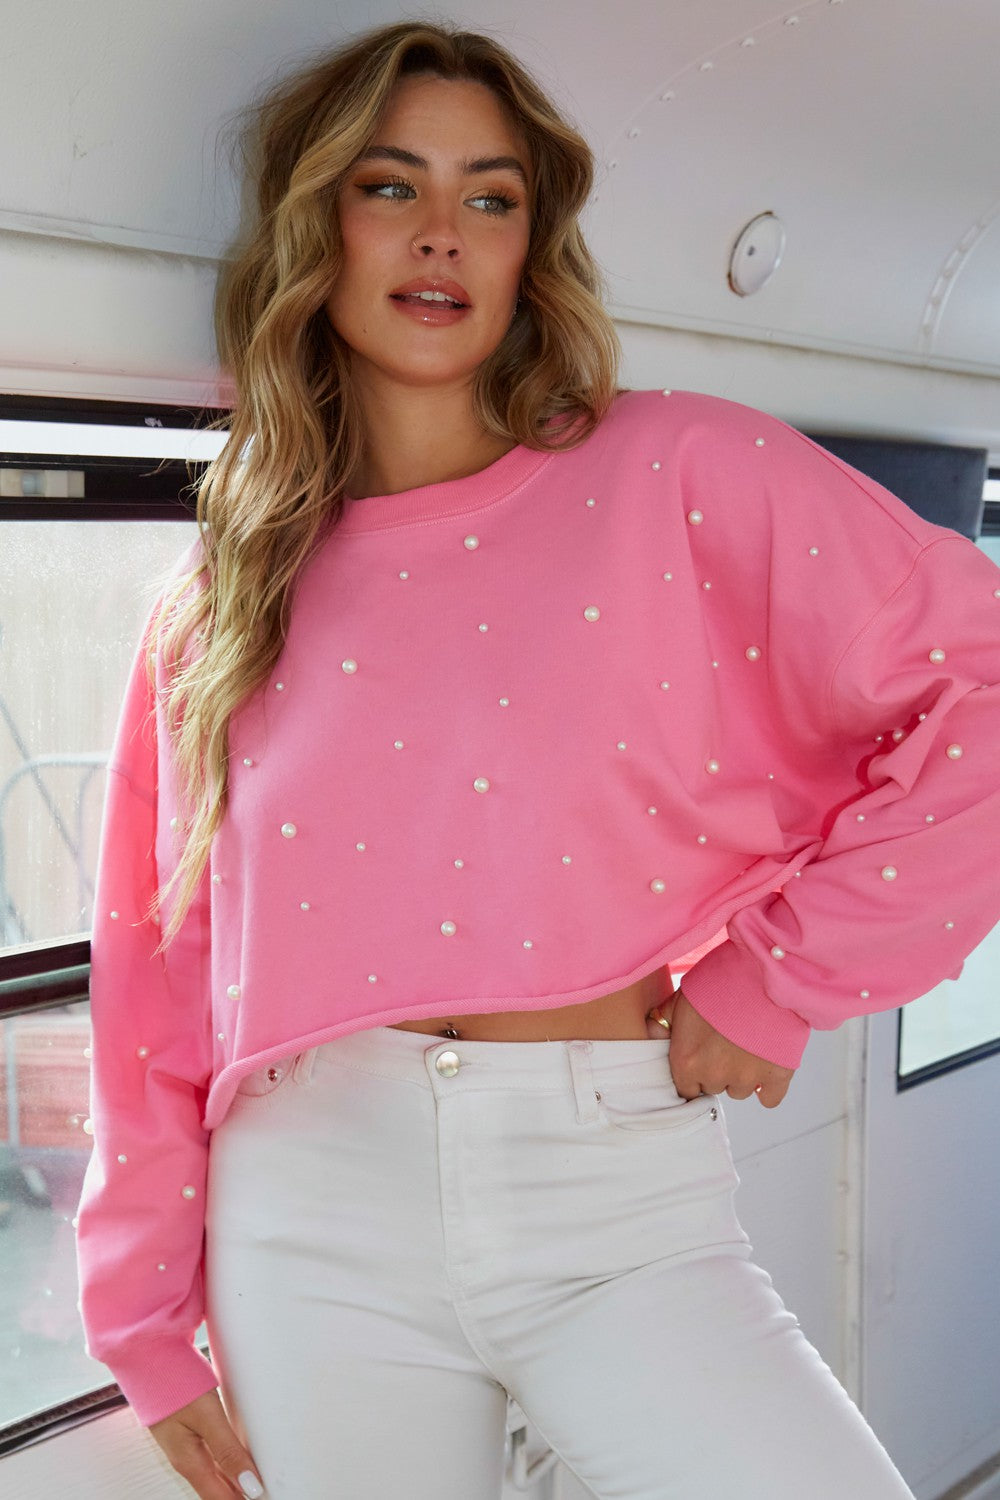 zSALE Pearl Studded Cropped Sweatshirt Pullover - Pink